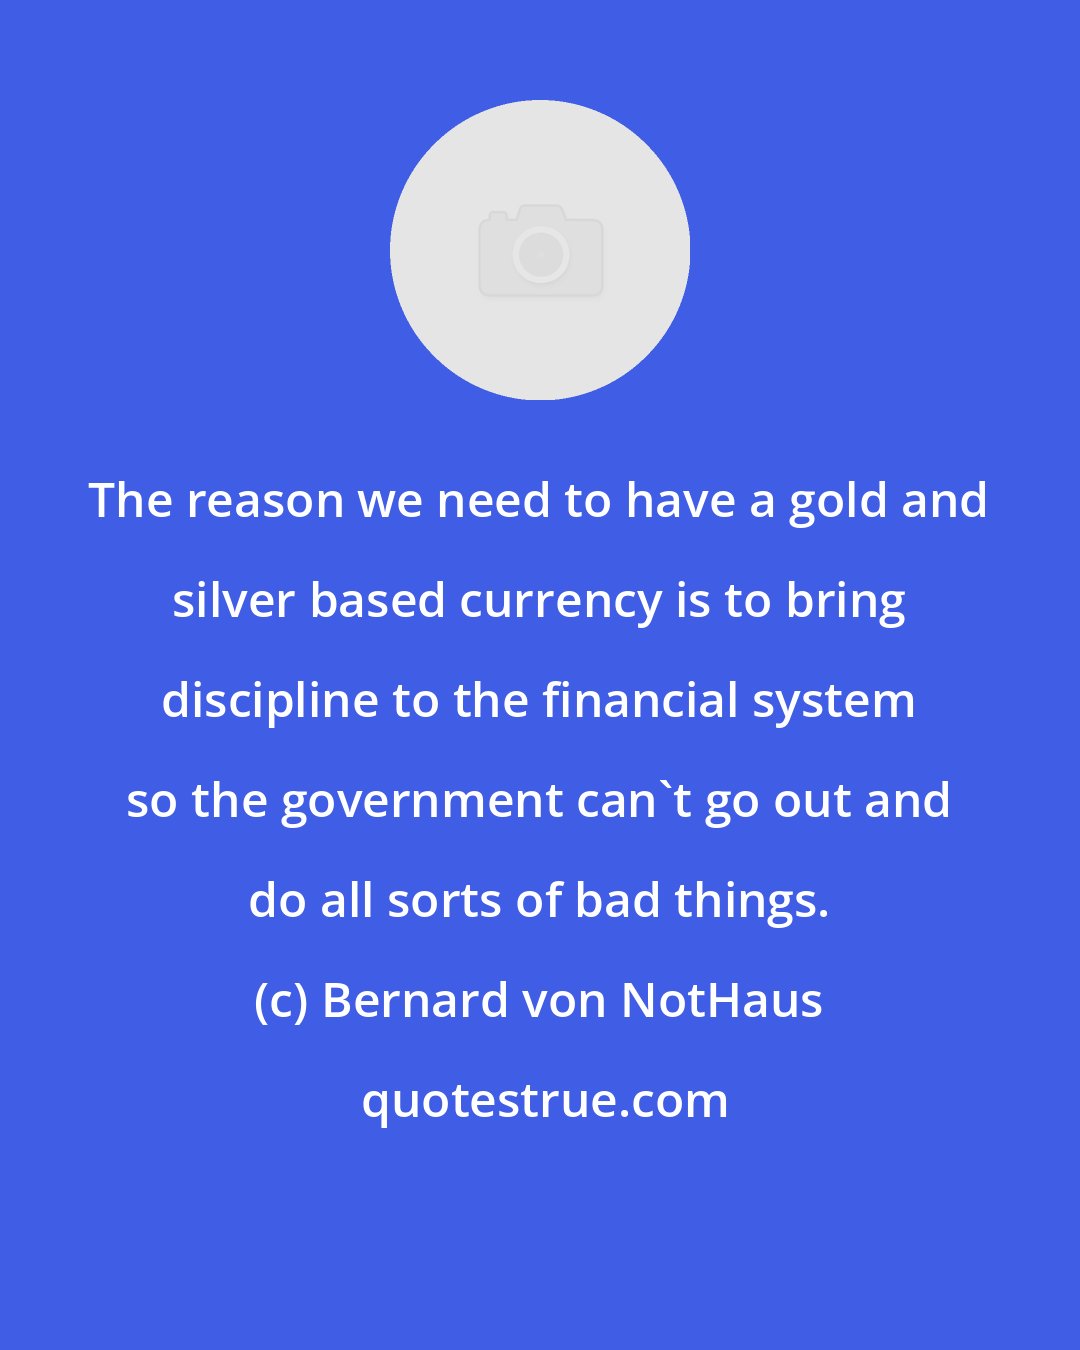 Bernard von NotHaus: The reason we need to have a gold and silver based currency is to bring discipline to the financial system so the government can't go out and do all sorts of bad things.